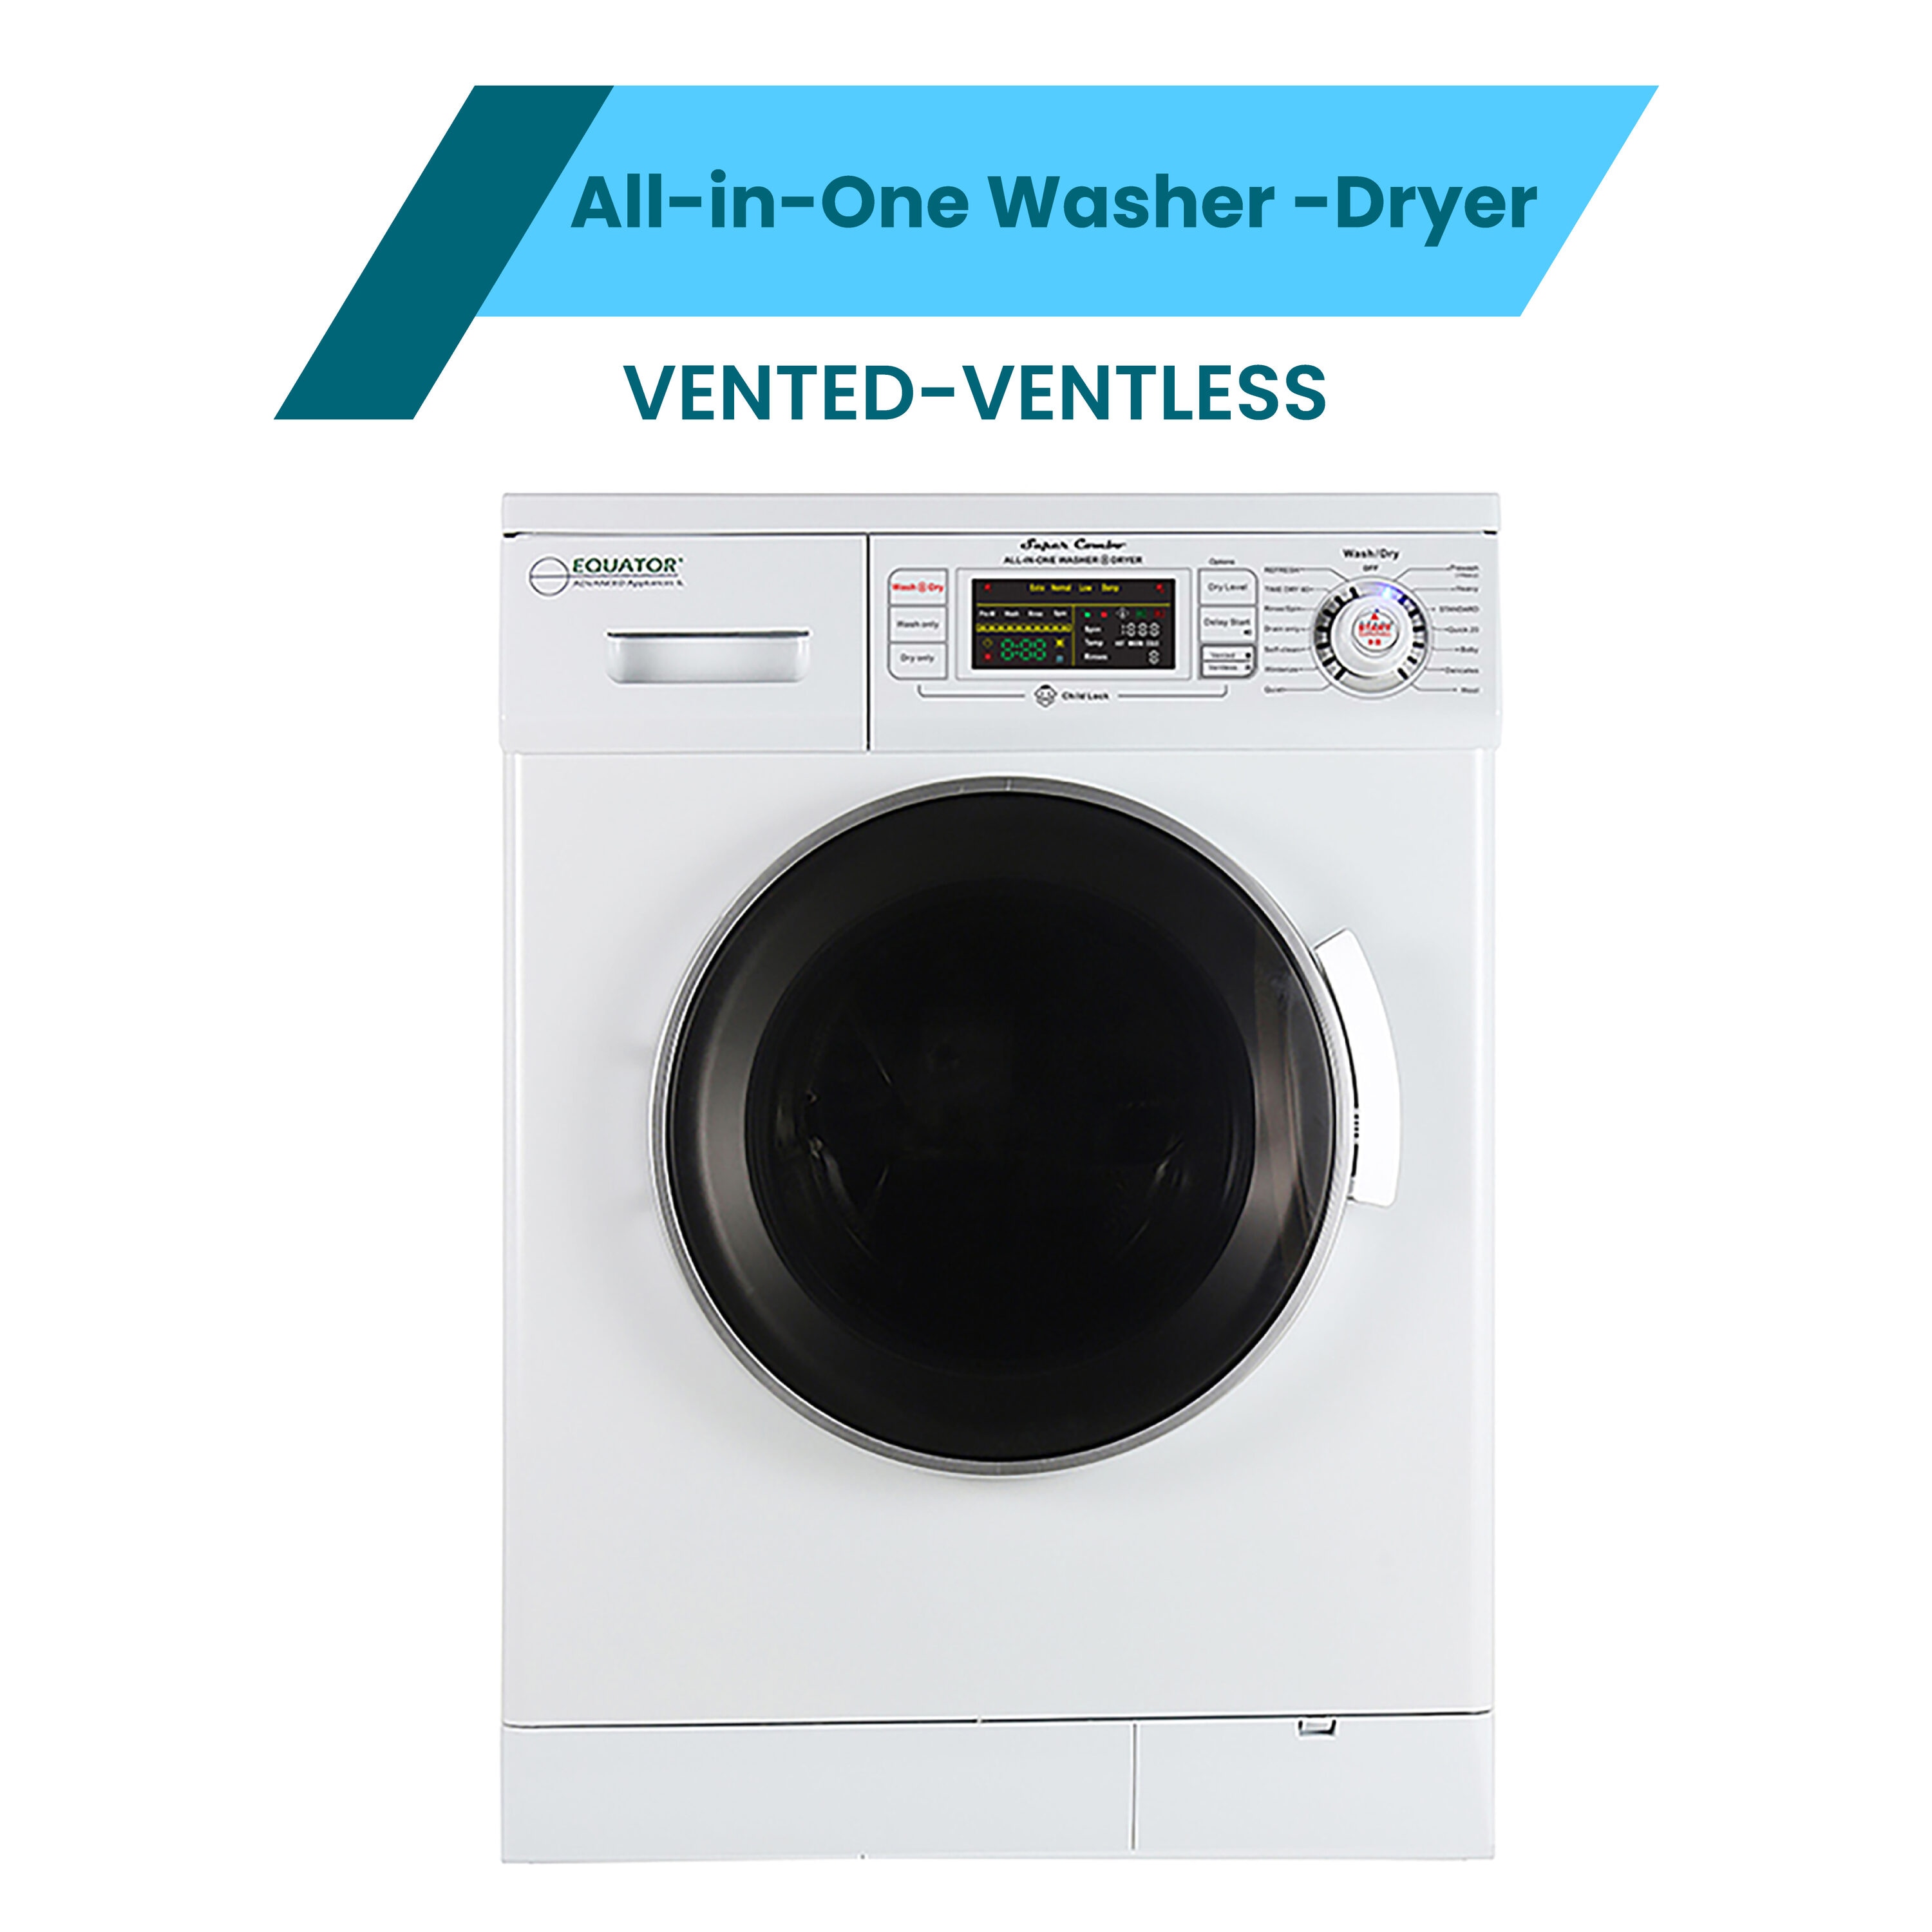 Equator Compact 13 lbs Vented/Ventless Dry, Winterize, Quiet, Easy to Use Controls, 2020 1.6 Cu. ft Front Load Washer and Electric Dryer Finis EZ 4400